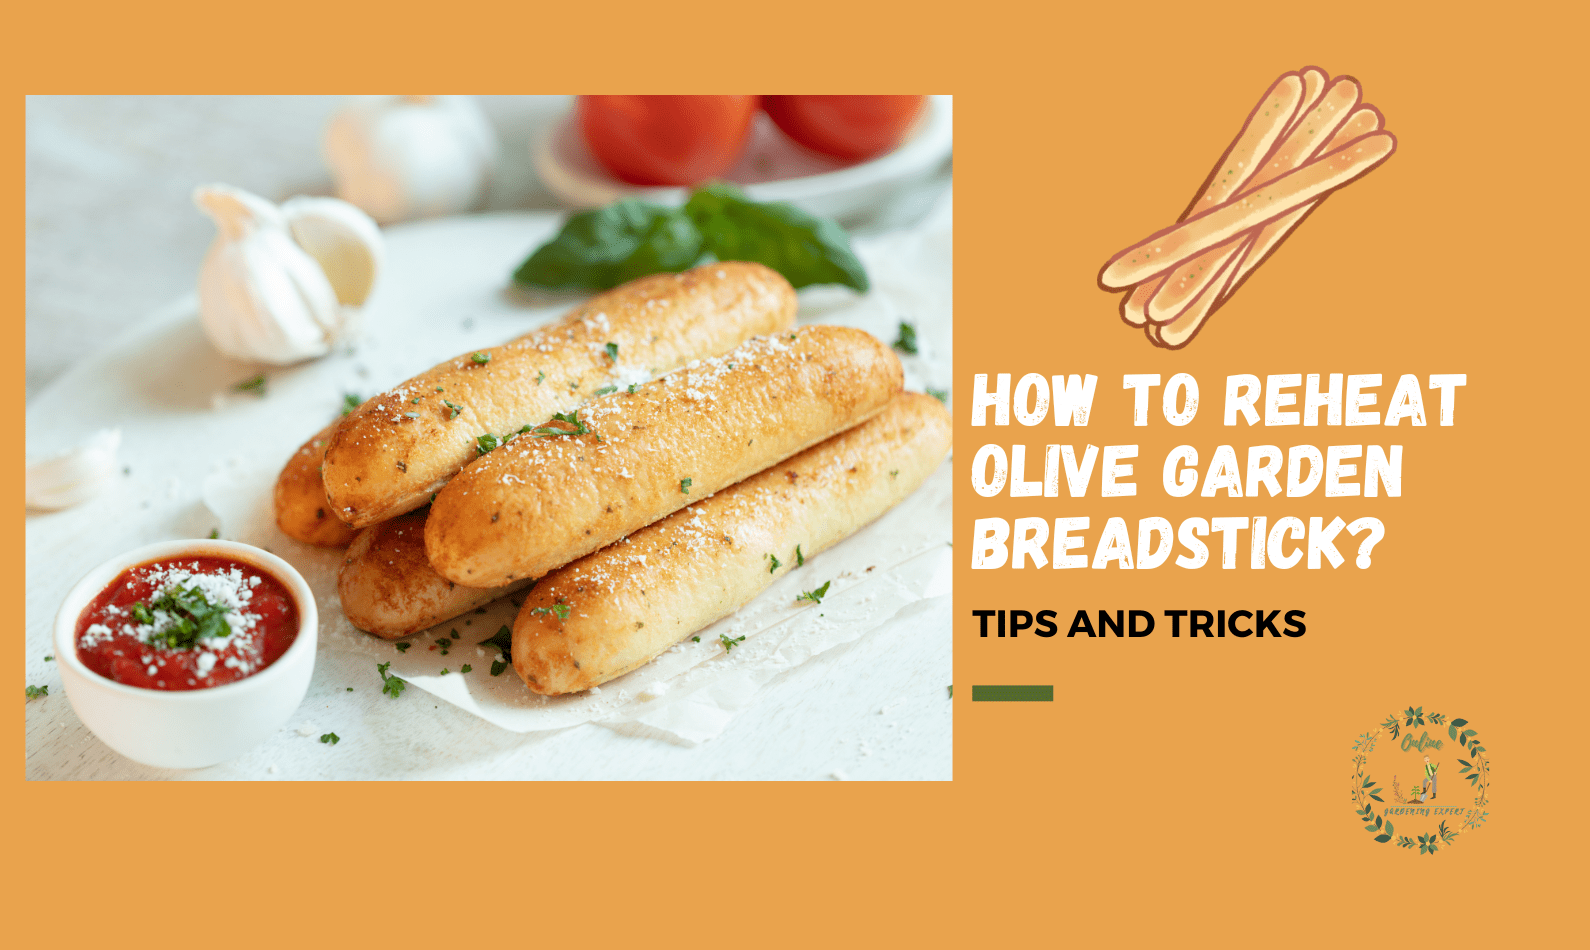 How to Reheat Olive Garden Breadstick?